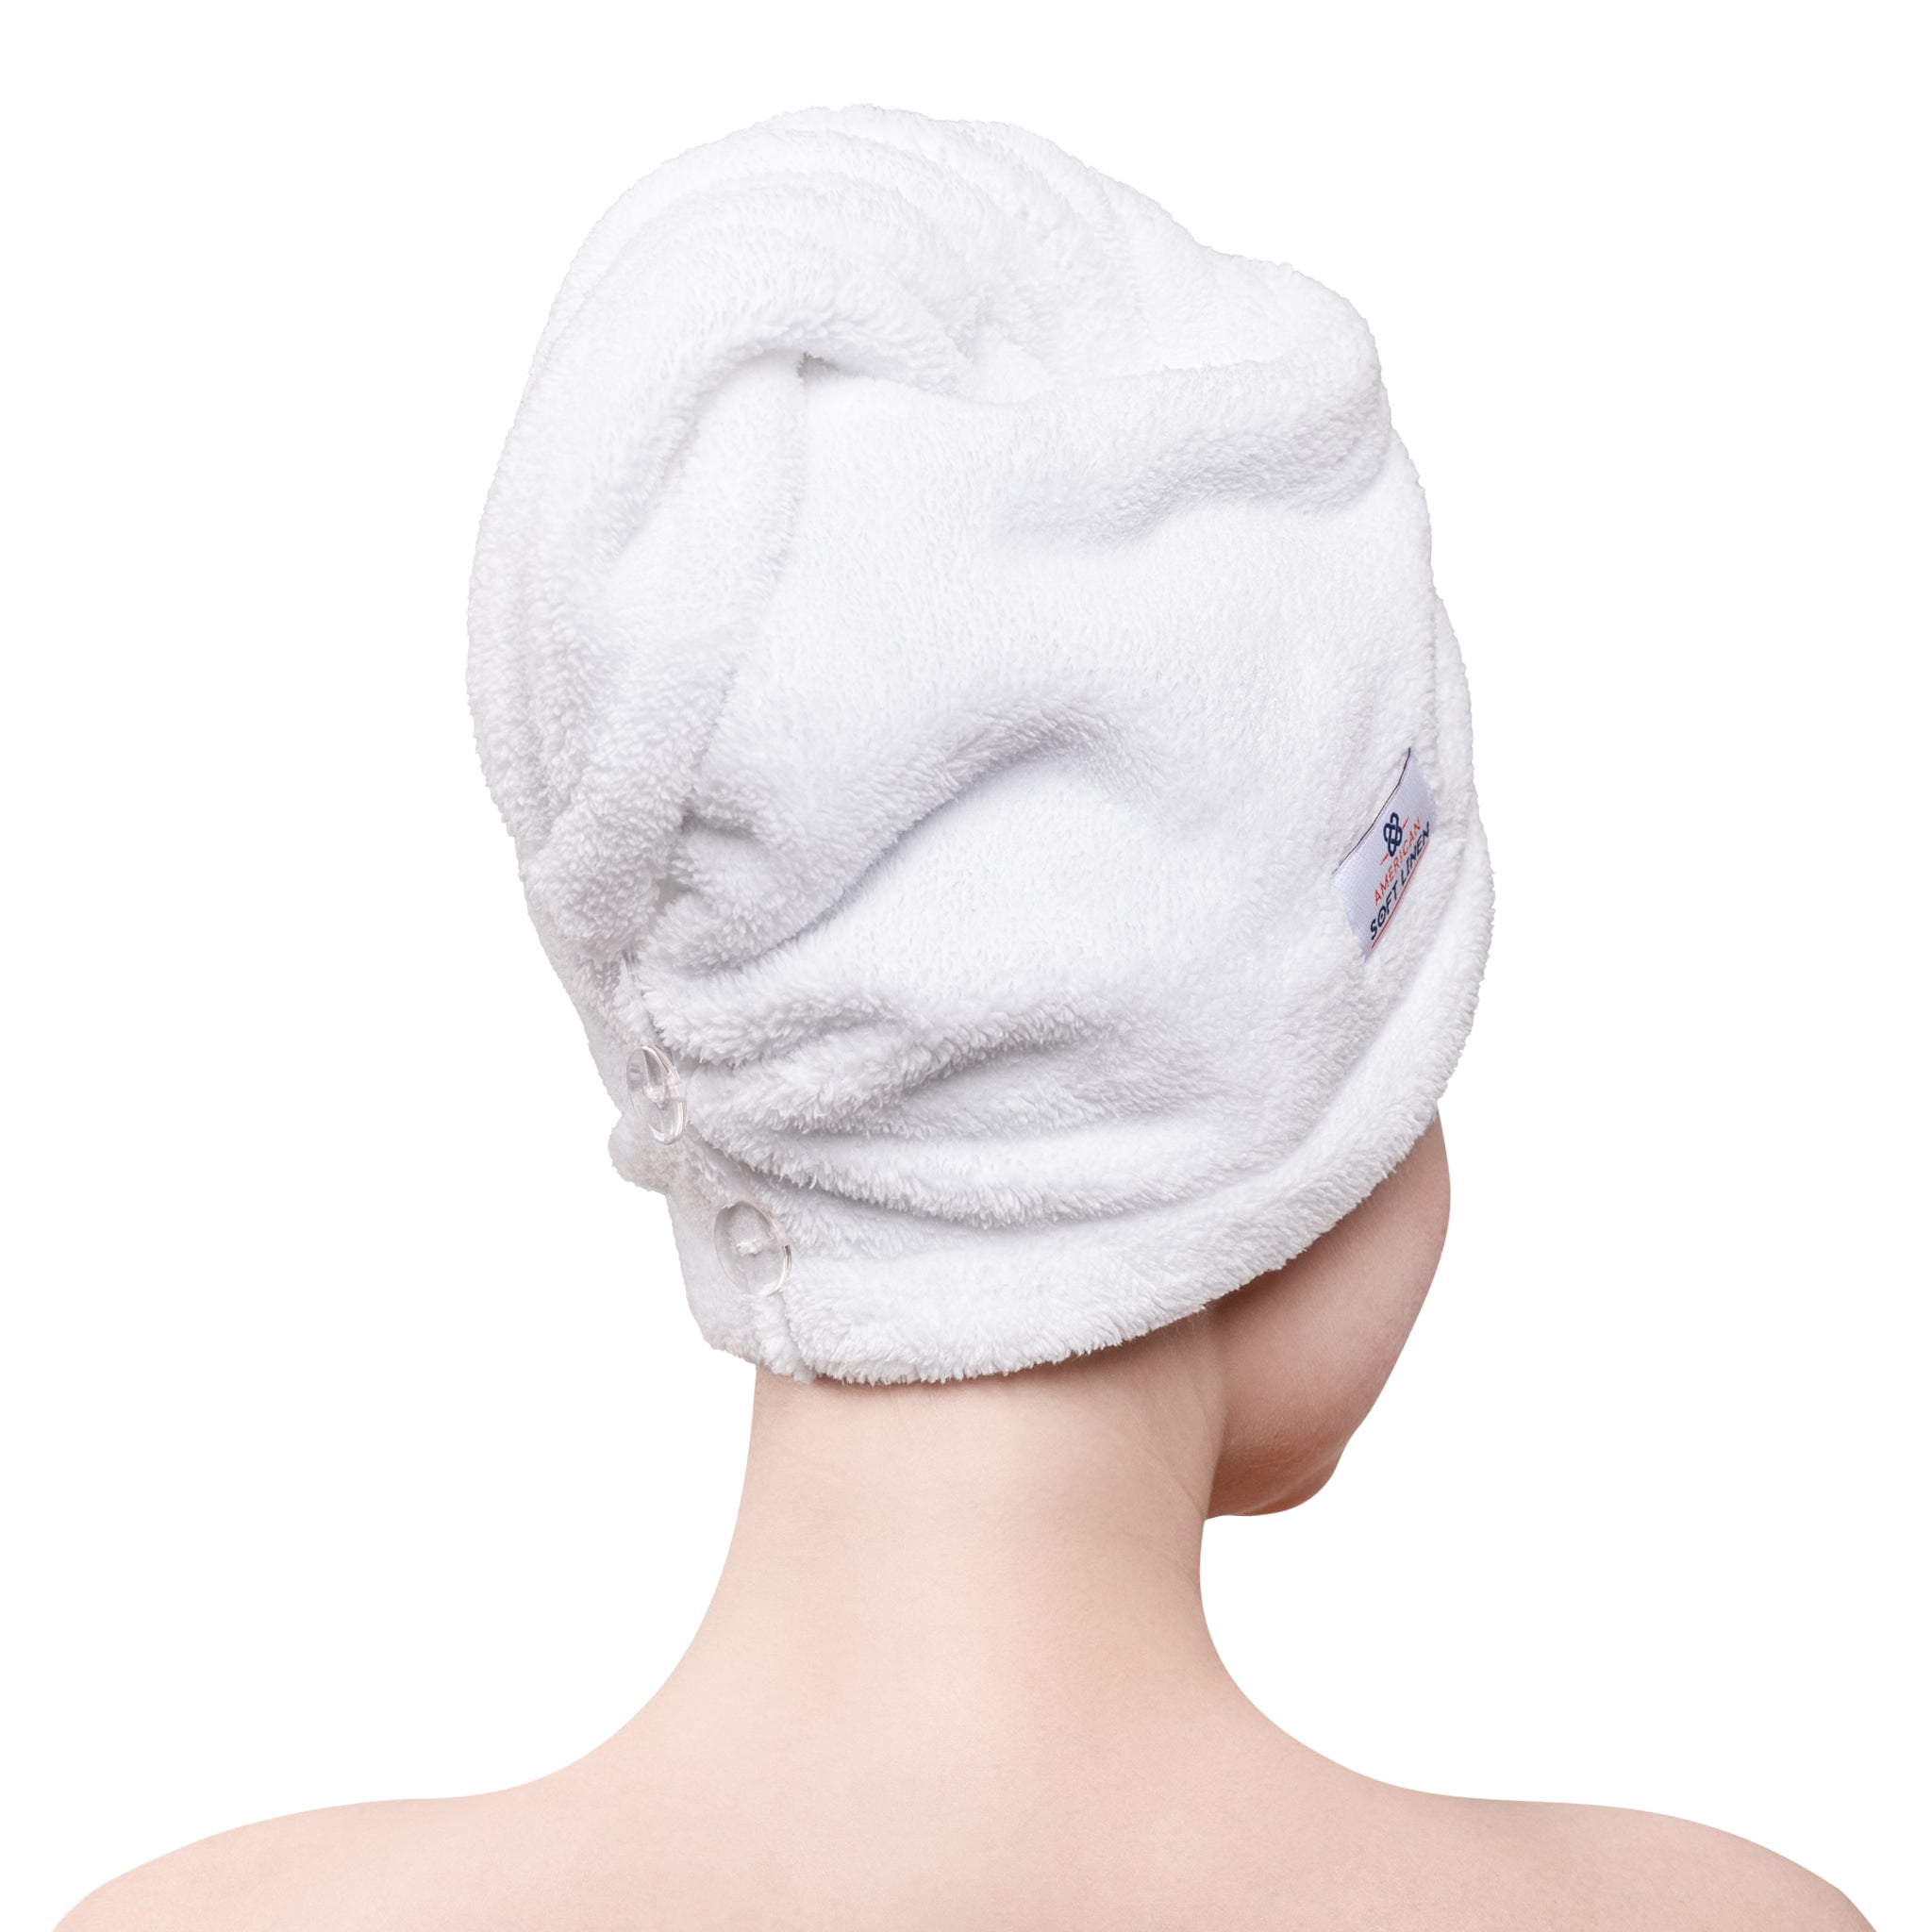 American Soft Linen Extremely Soft Super Absorbent and Fast Drying Hair Towel -white-3